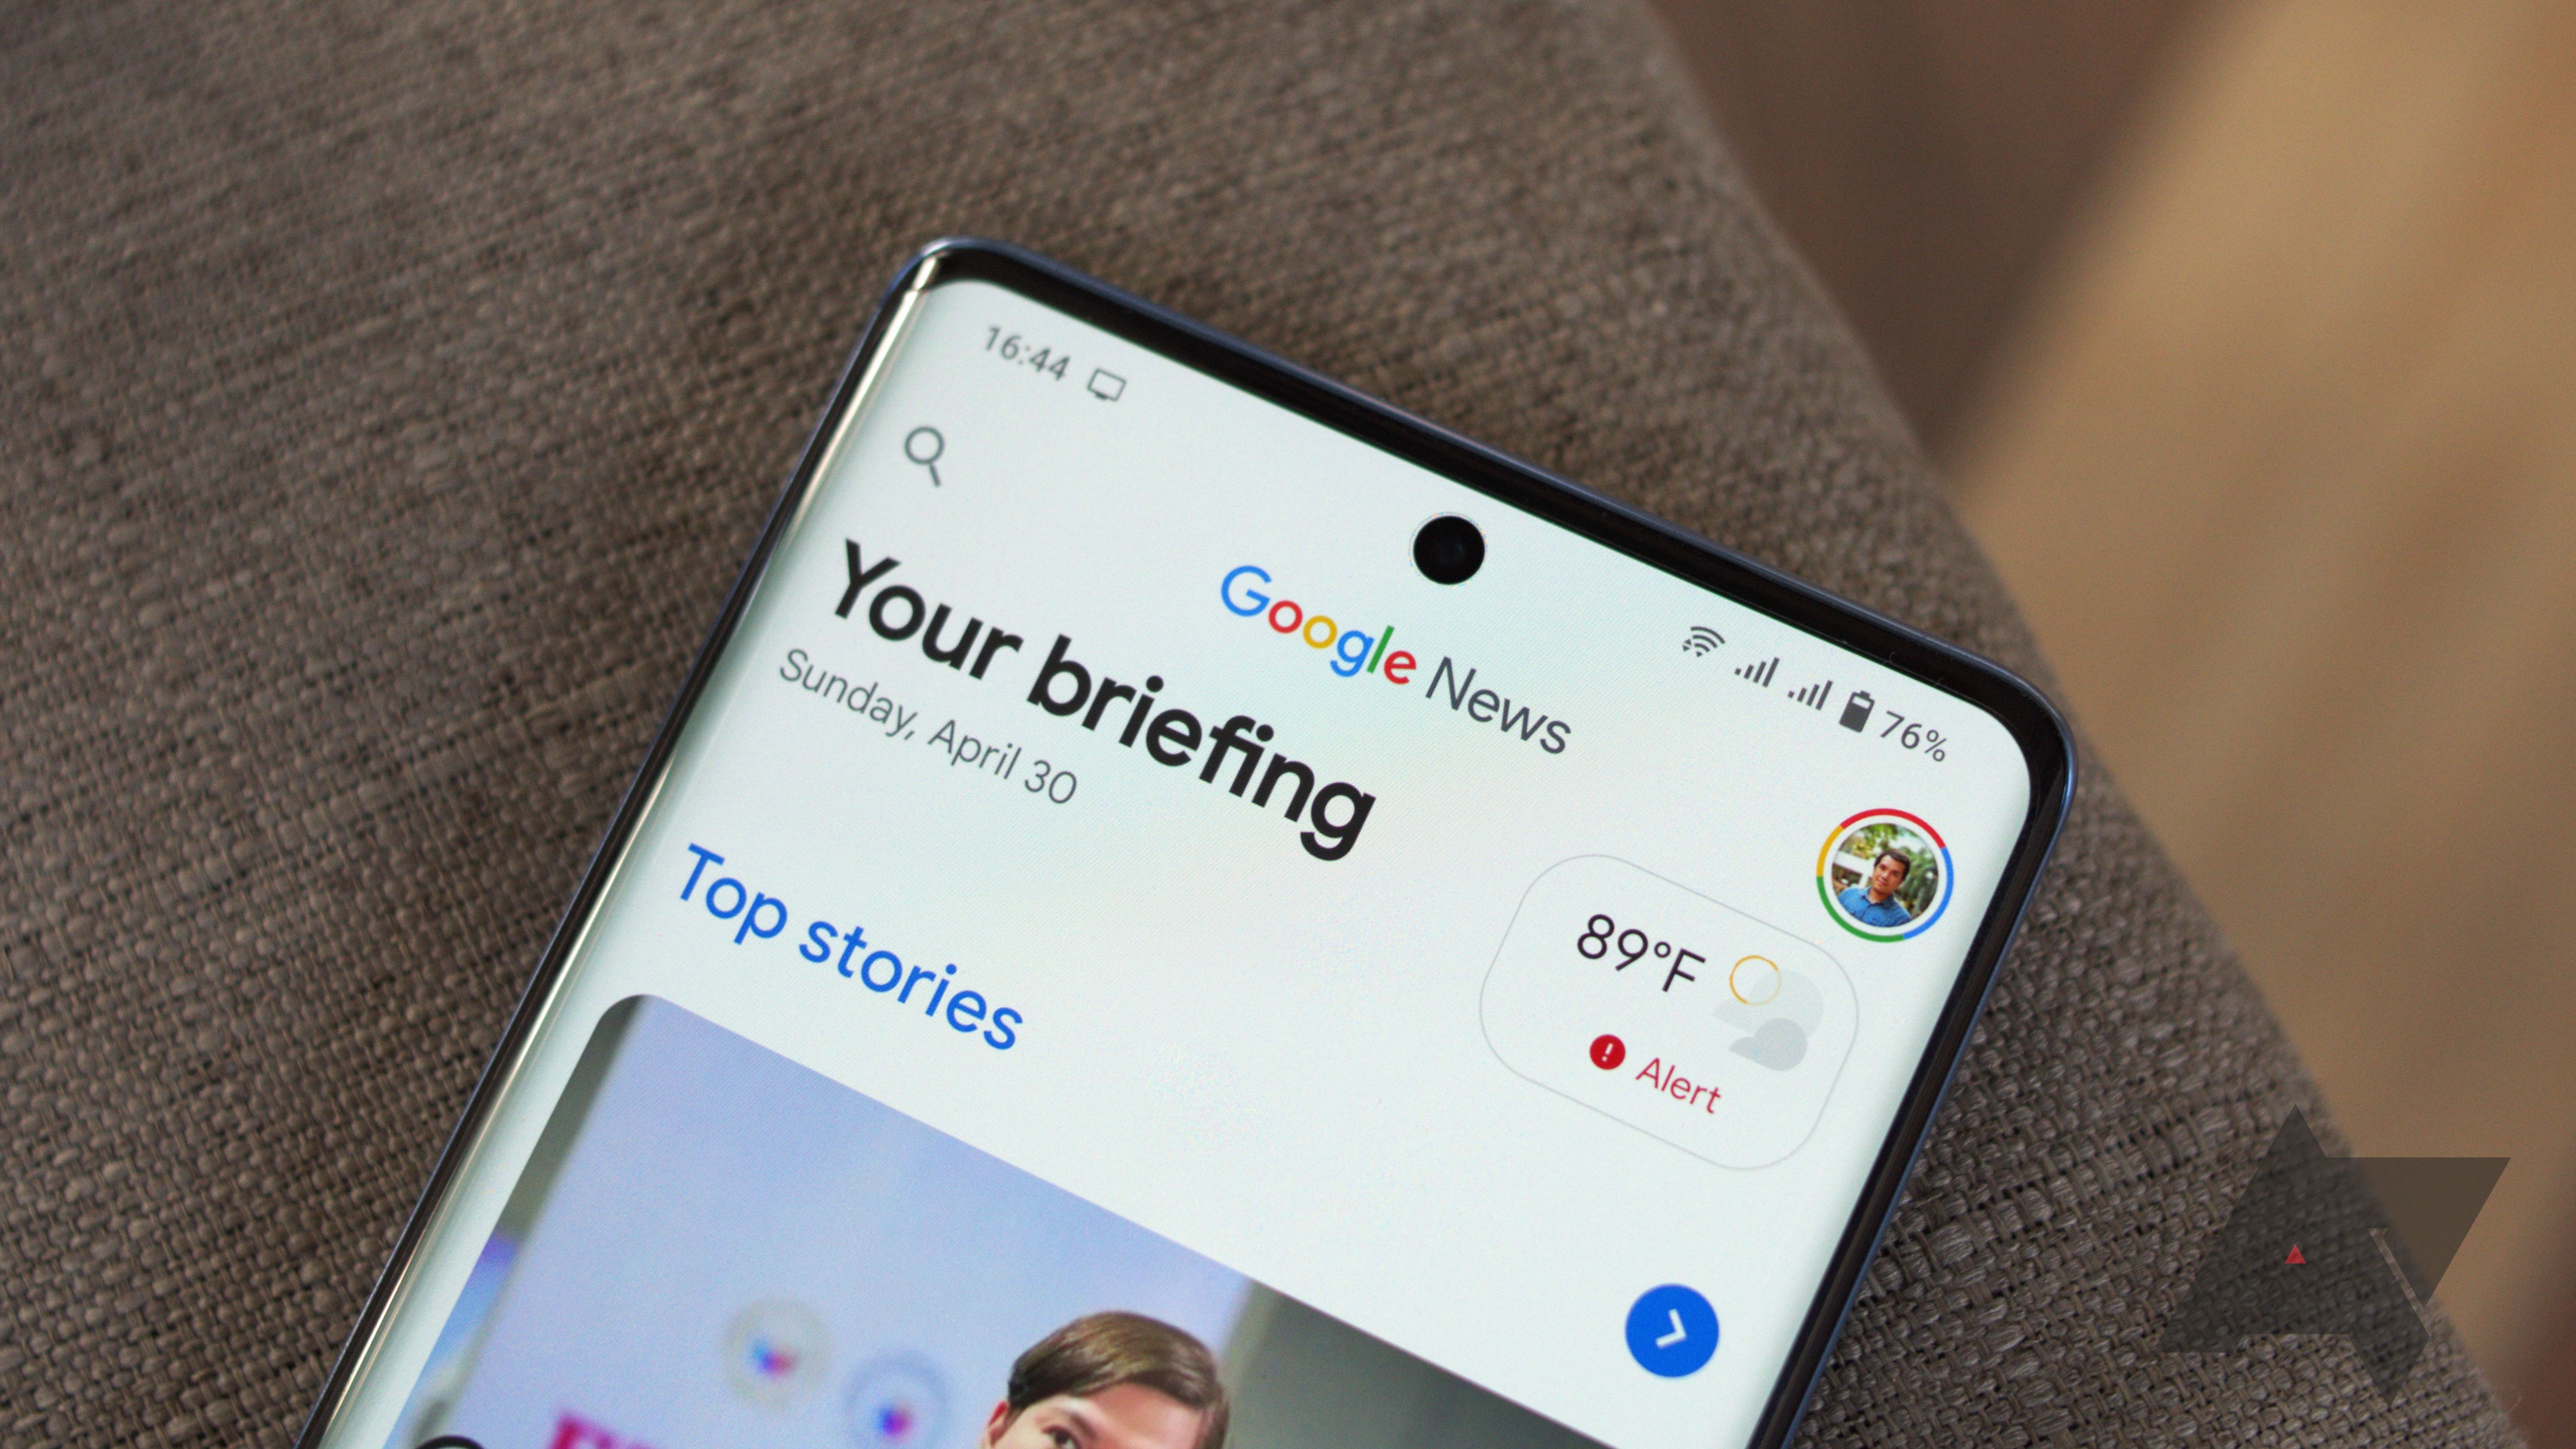 Home screen of the Google News app on a smartphone